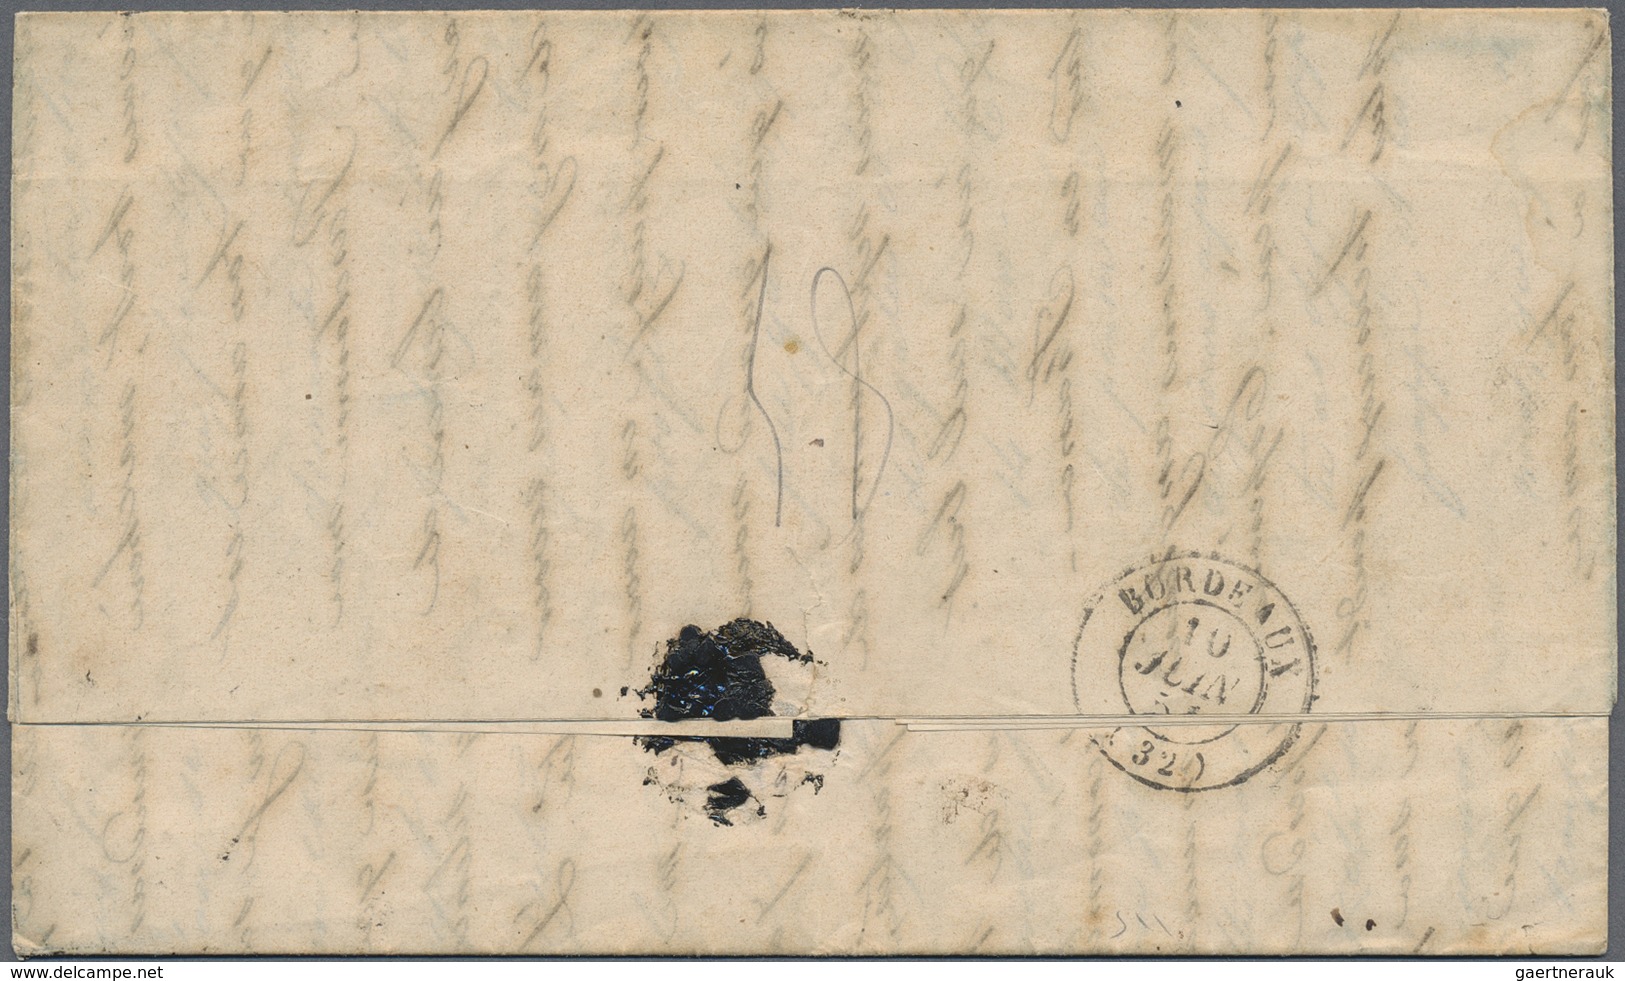 Br Mauritius: 1851. Stampless Envelope To France Written From Port Louis Cancelled By 'Crown/Mauritiul - Maurice (...-1967)